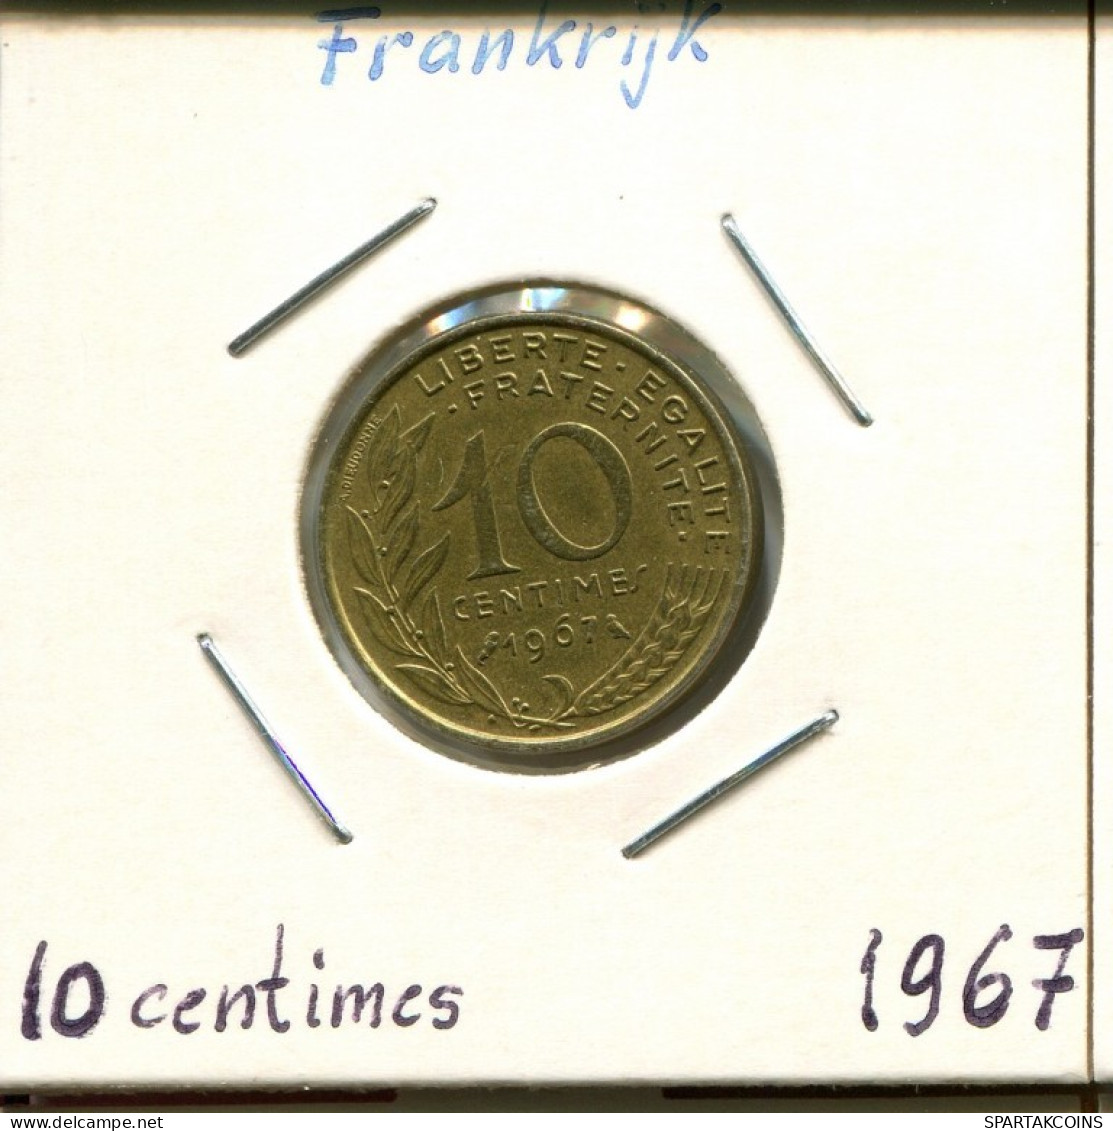 10 CENTIMES 1967 FRANCE Coin French Coin #AM121.U.A - 10 Centimes